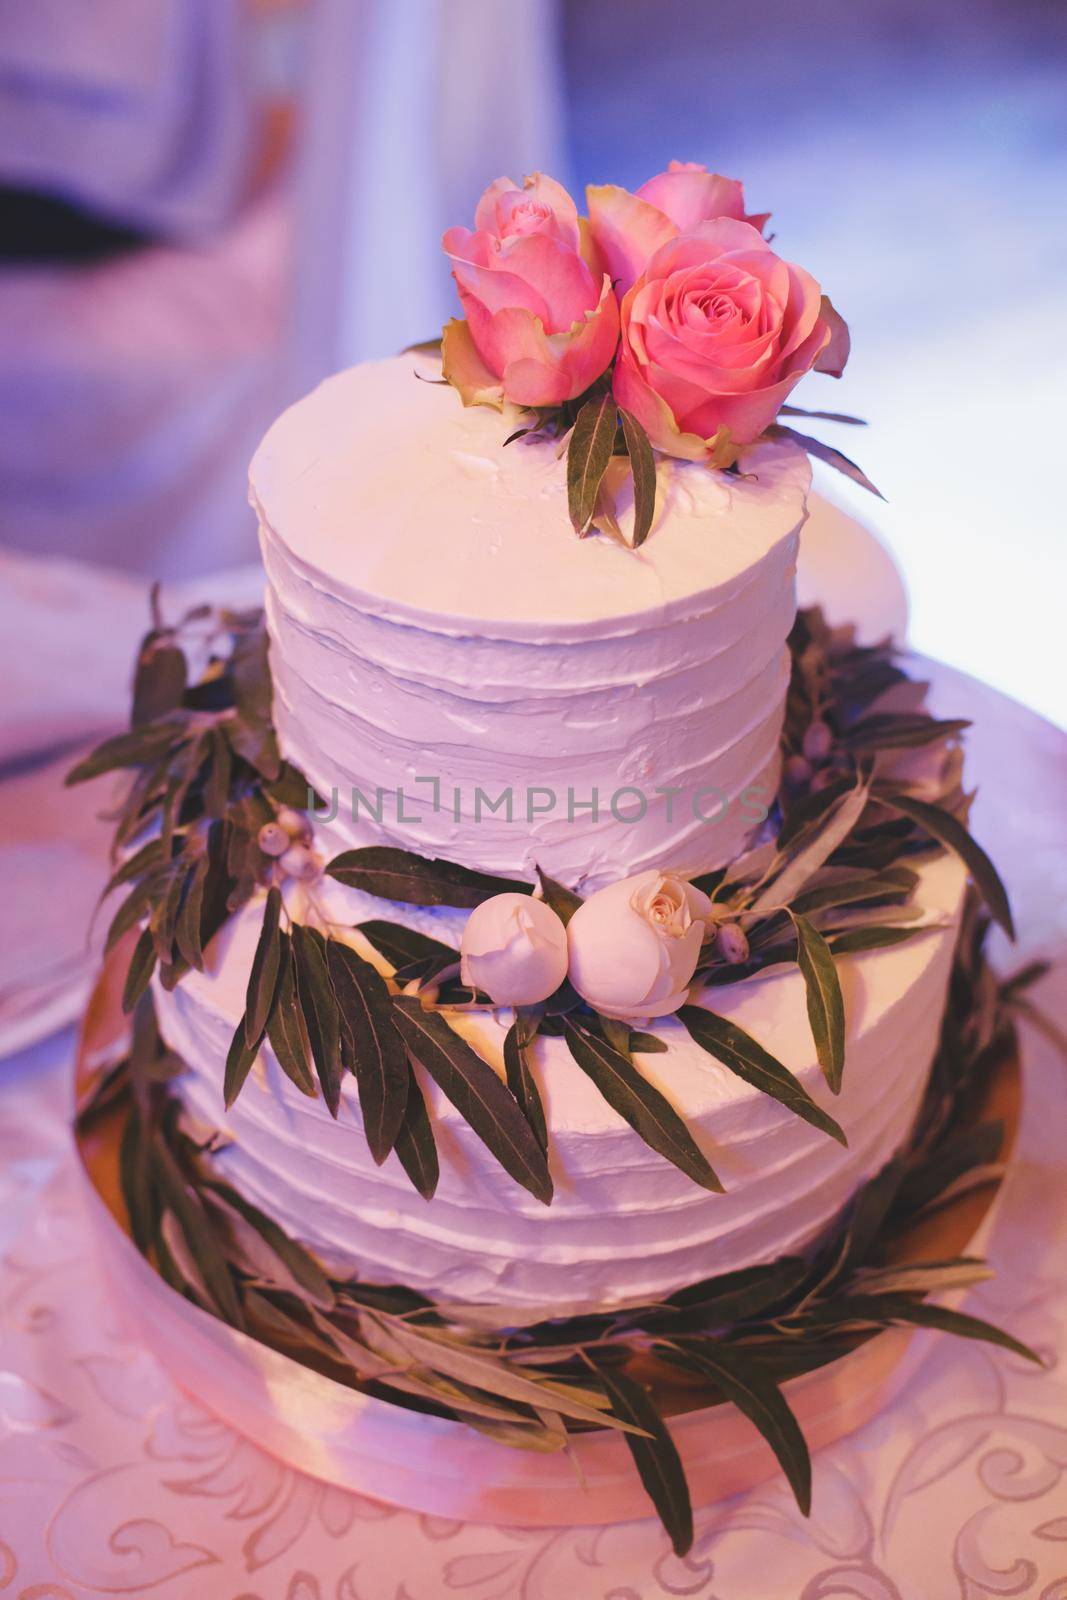 White delicate wedding cake with fresh flowers.